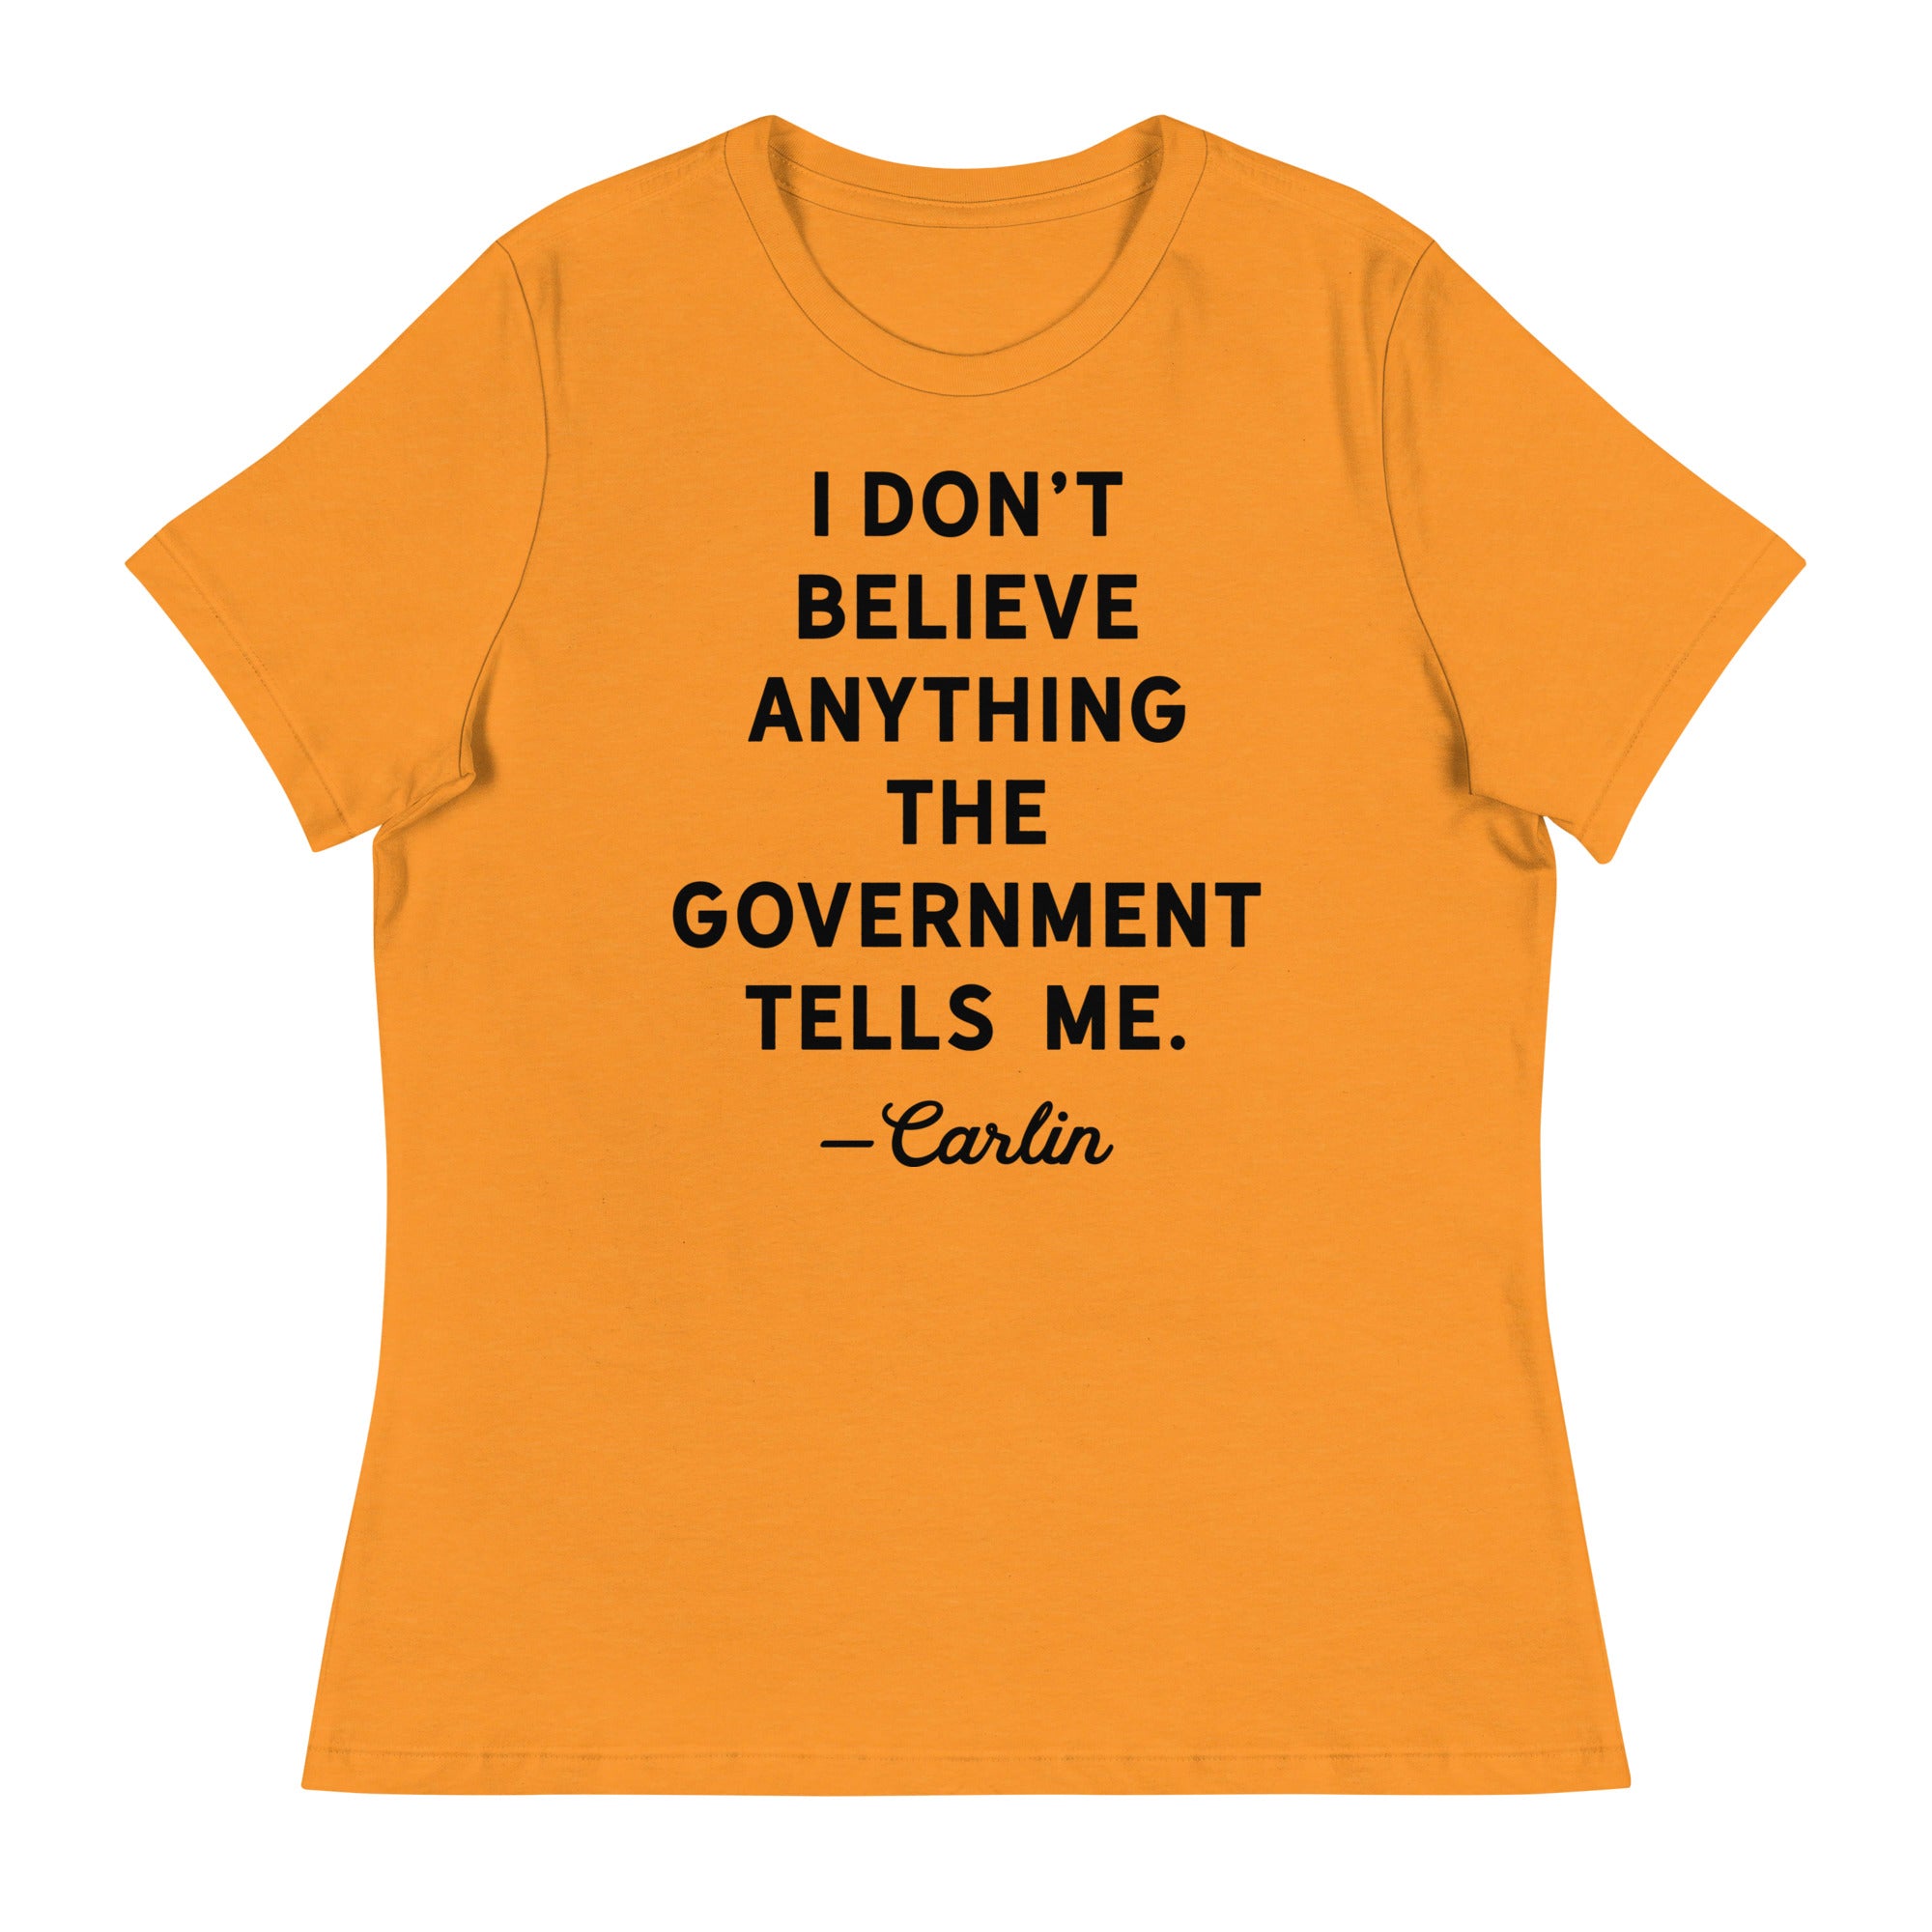 I Don't Believe Anything The Government Tells Me Women's Crew Neck T-Shirt